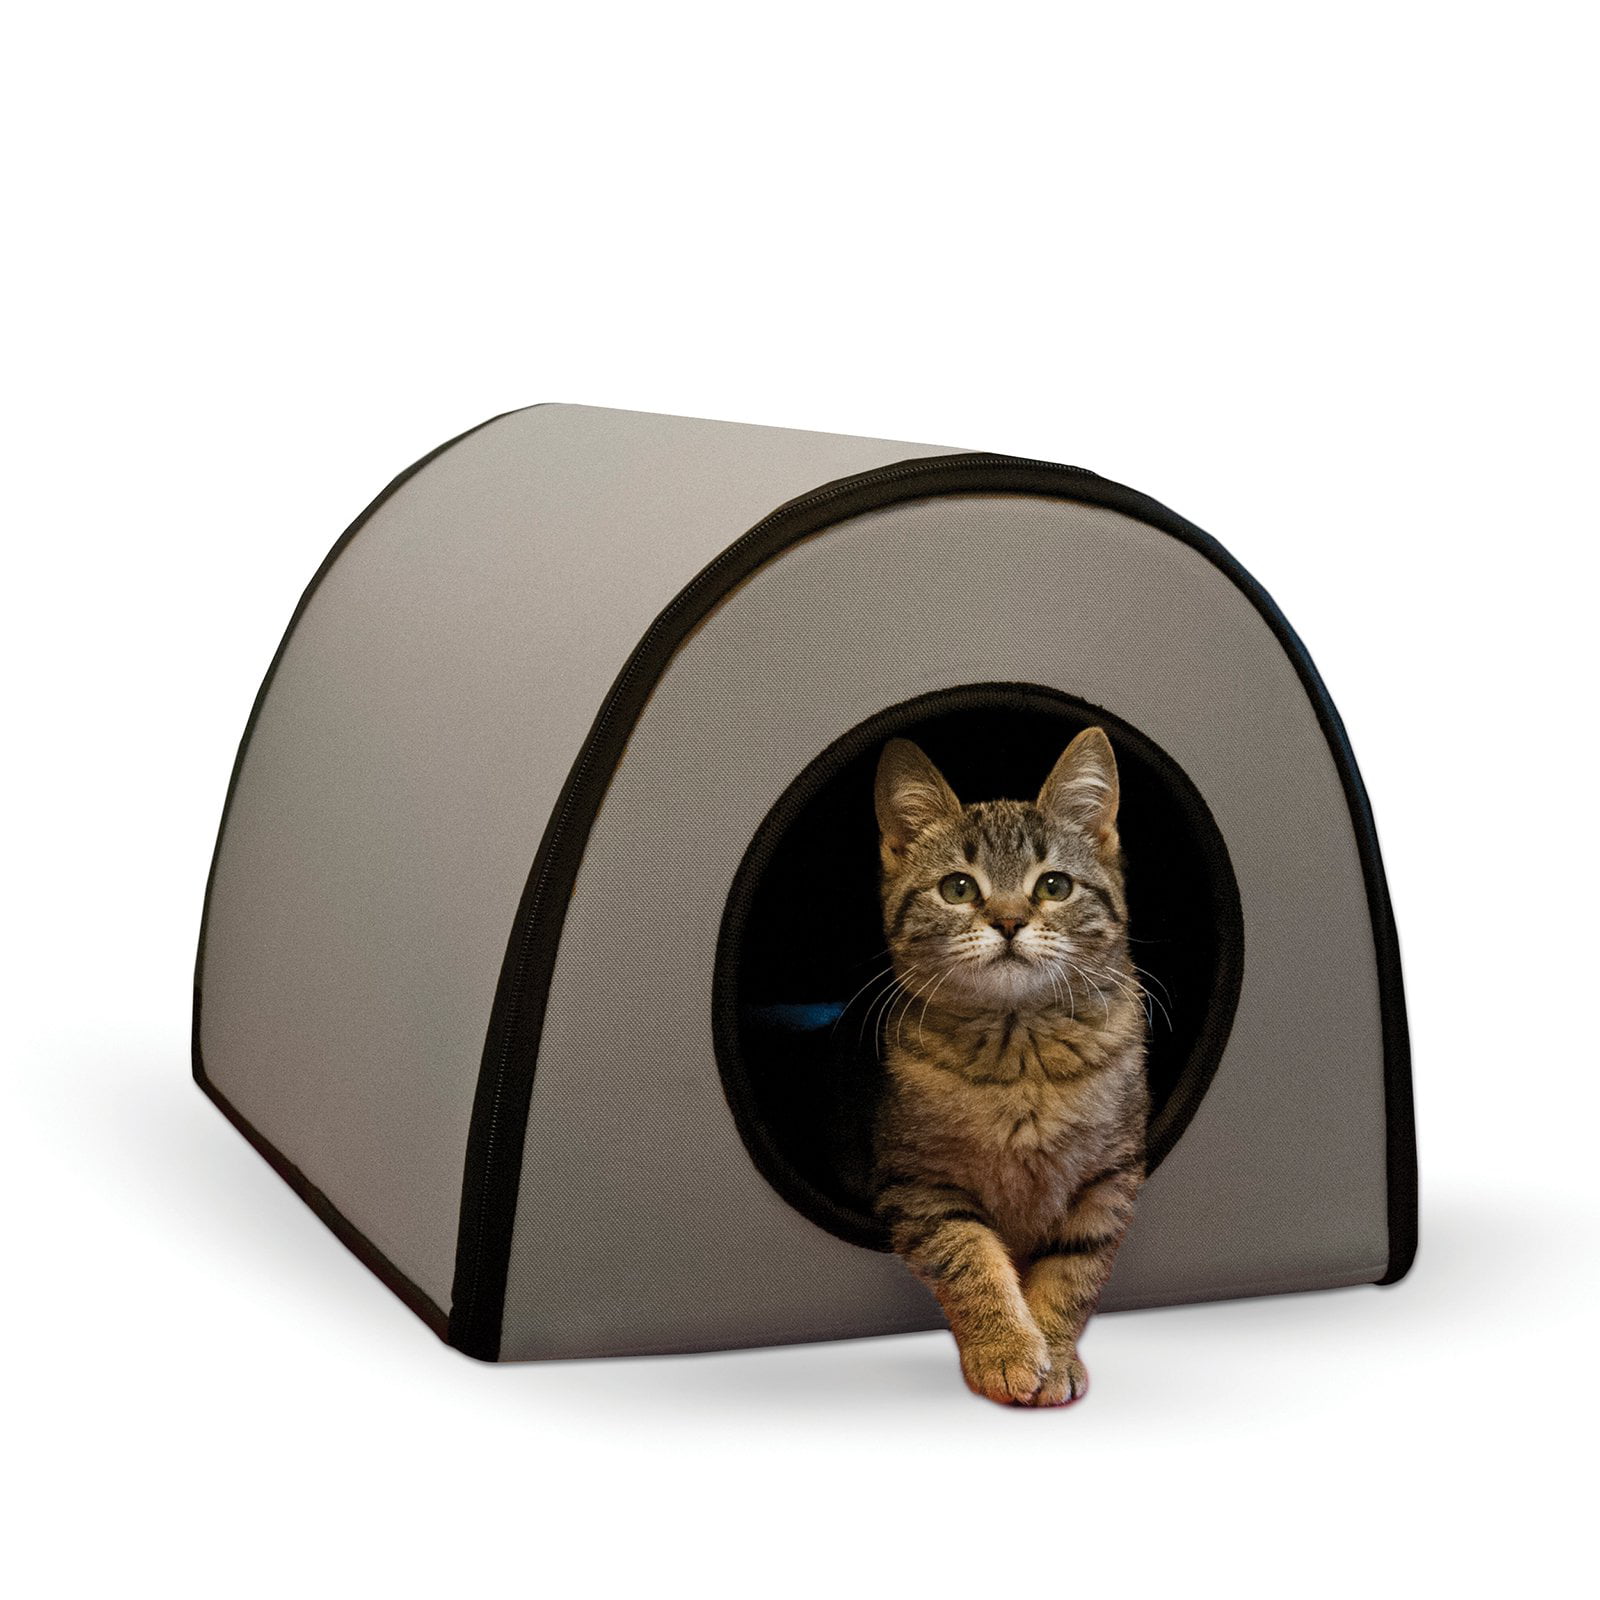 Color : Blue, Size : L MISLD Foldable Pet Tent Princess Room Pet Houses Warm Pet Teepee Lovely Home Cat Nest Dog House for Cat Puppy for Travel Outdoor Activity 